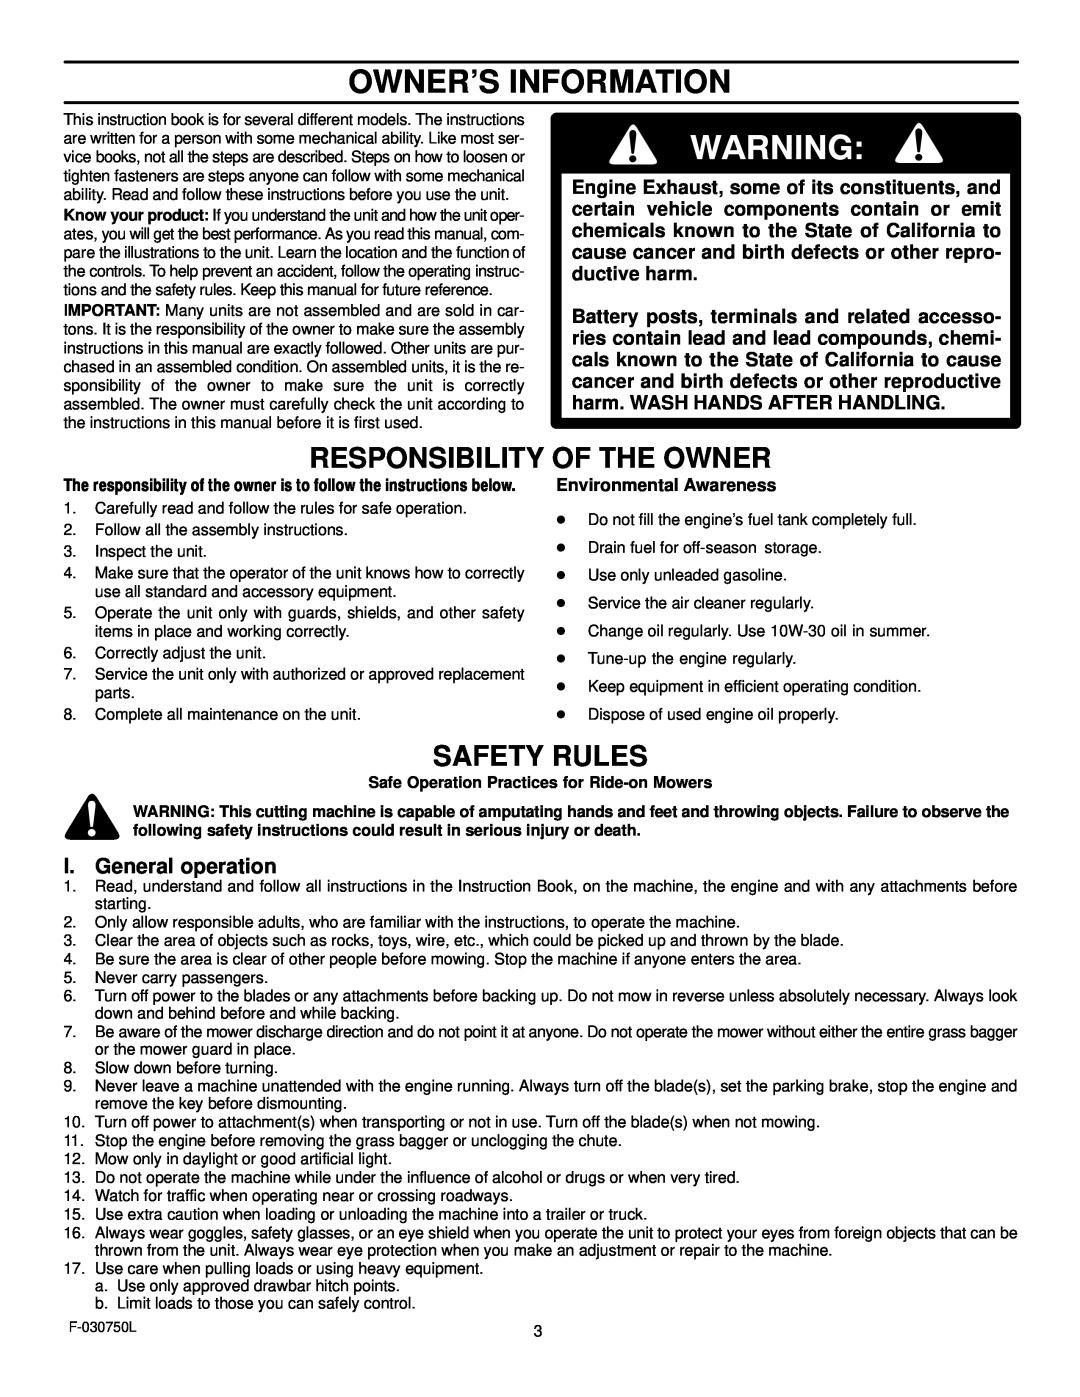 Murray 425306x48A manual Owner’S Information, Responsibility Of The Owner, Safety Rules, I. General operation 